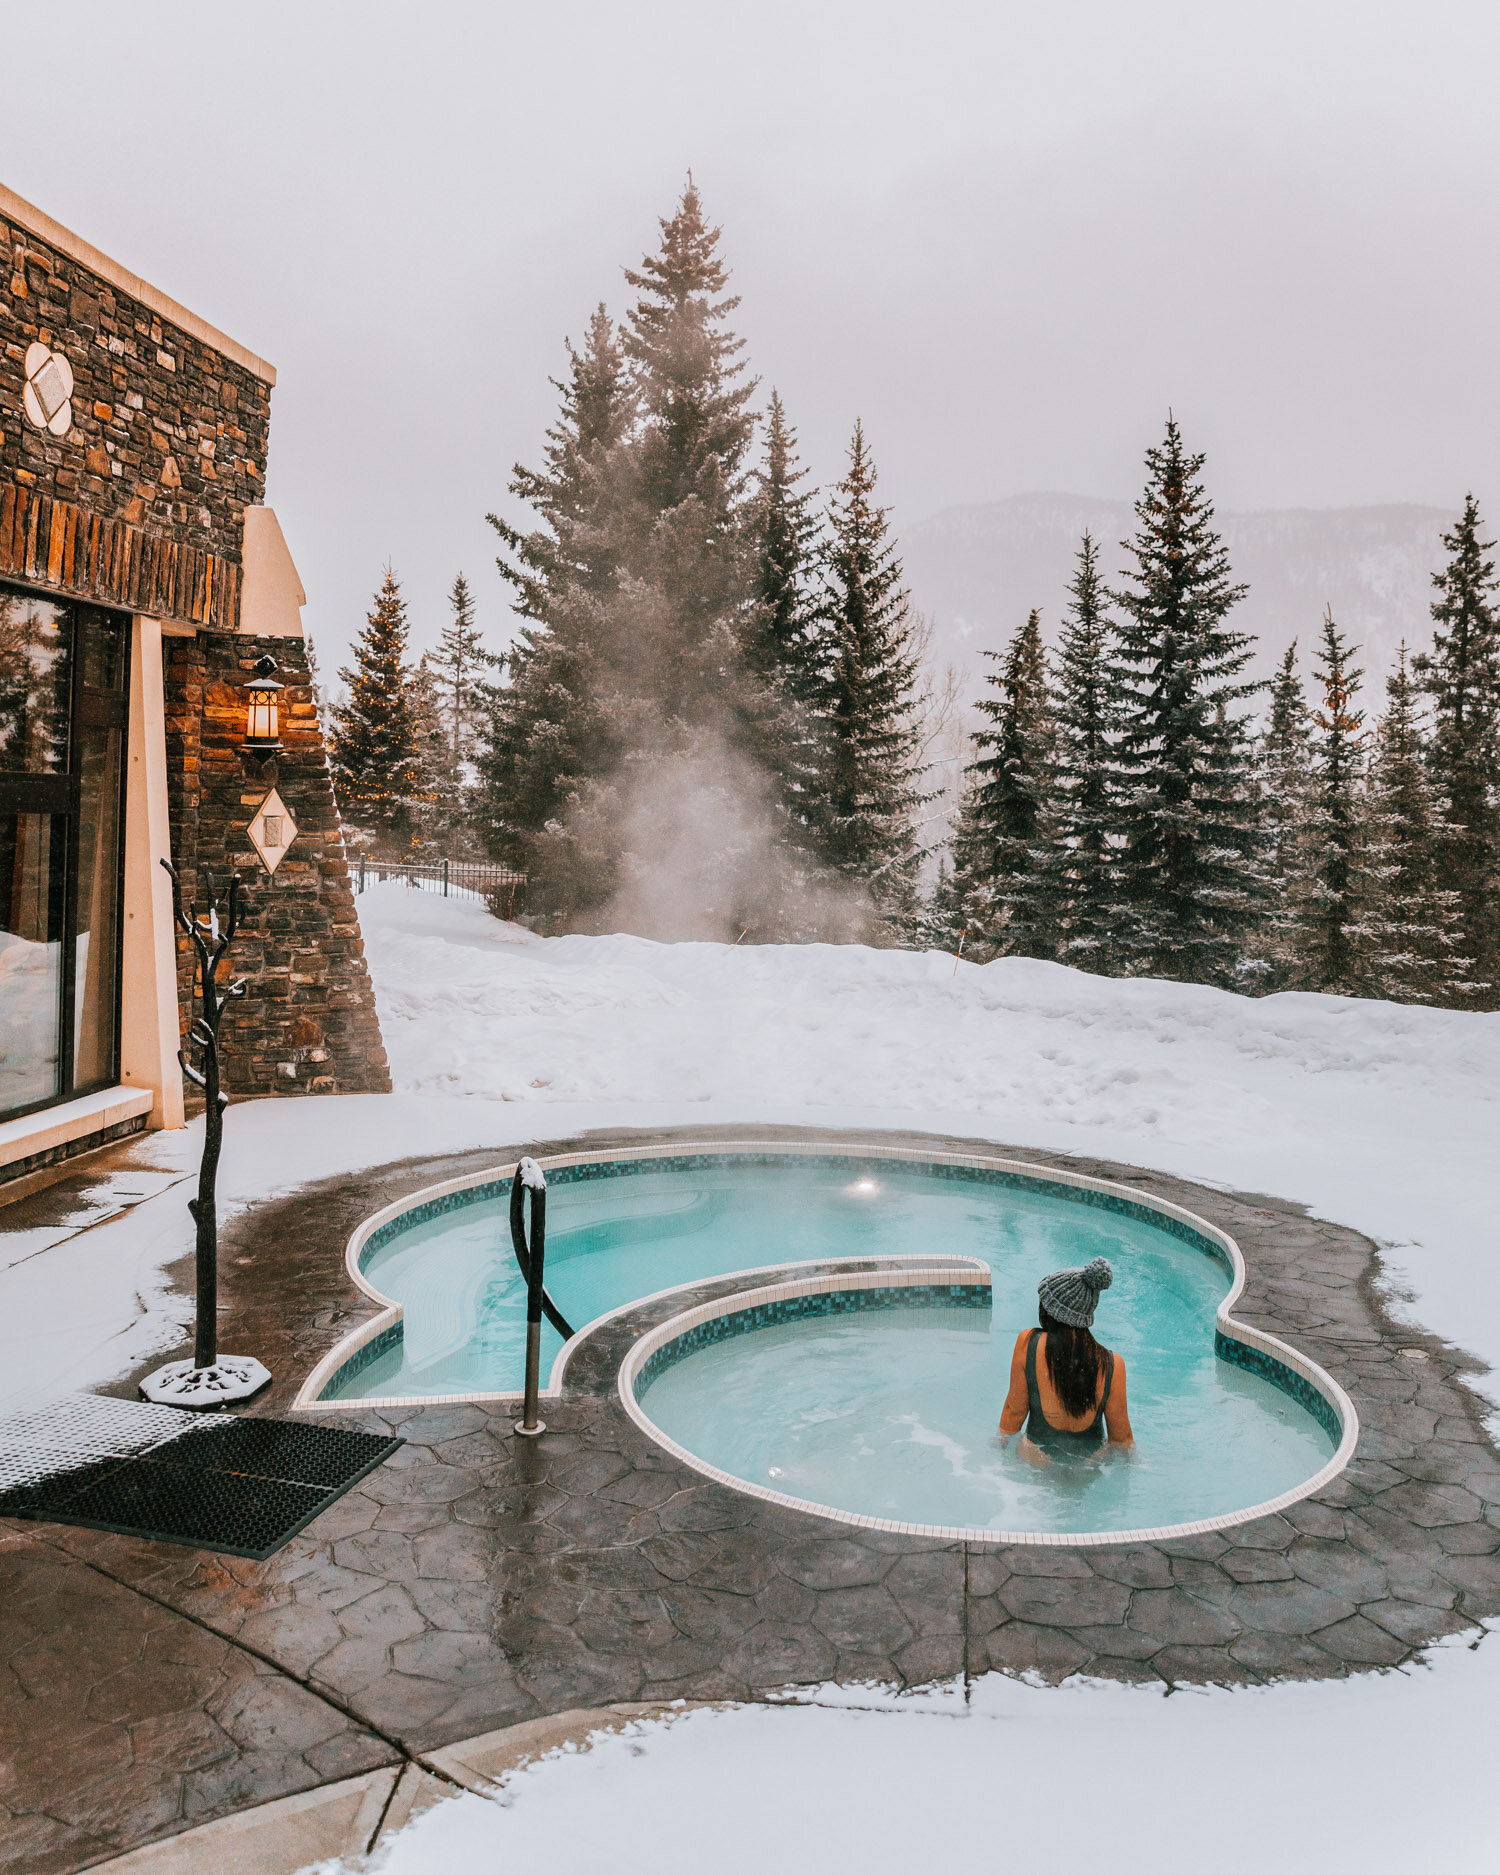 Fairmont Banff Springs spa pool // The Ultimate Guide to Visiting Banff in Winter